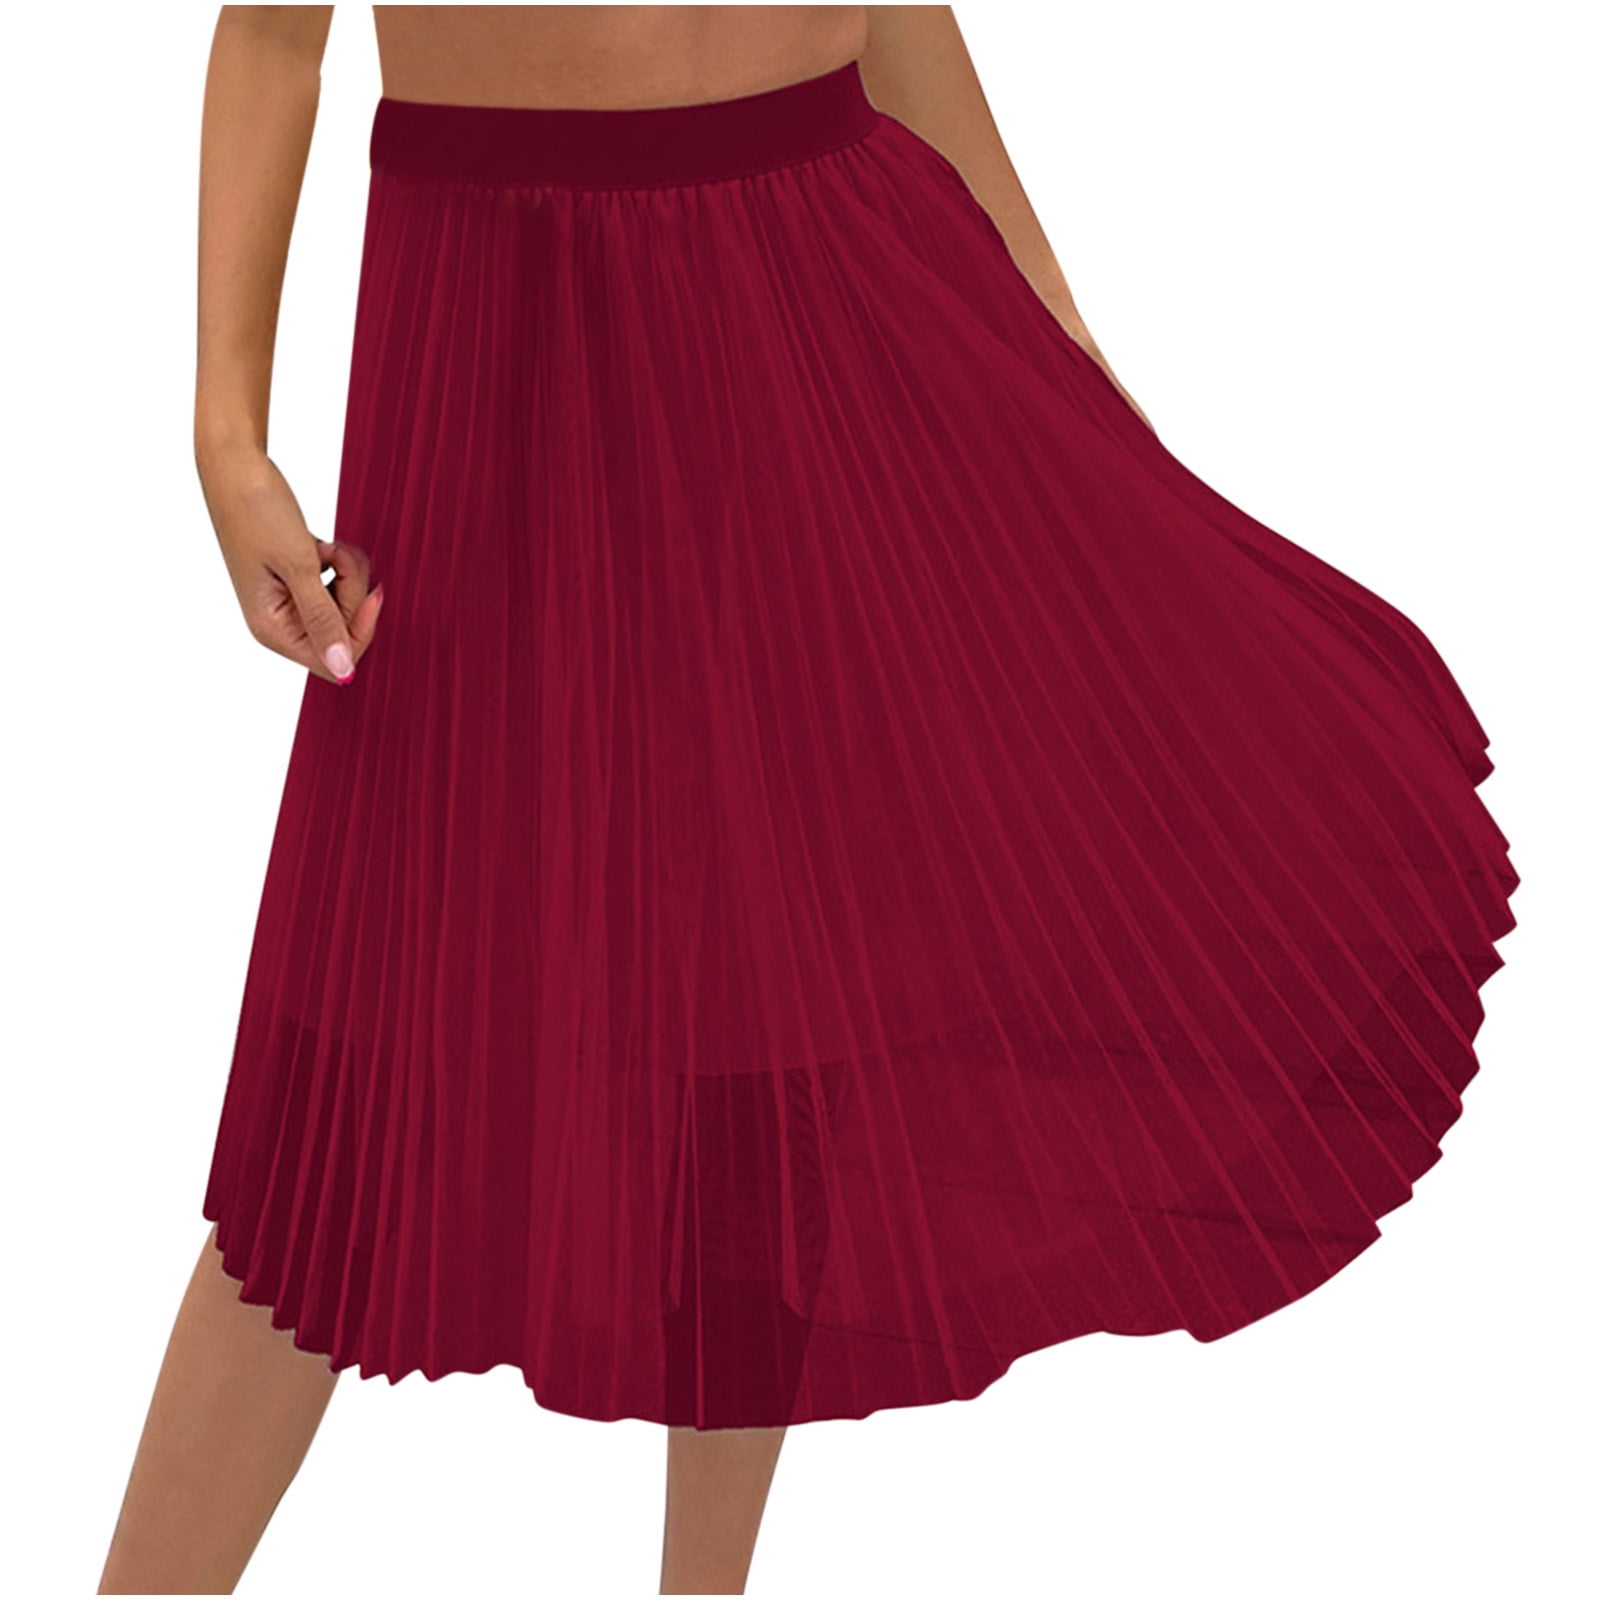 Solid Color Layered Mesh Skirts for Women Stretchy High Waist Pleated Midi  Skirt Winter Flowy Casual A-Line Skirts